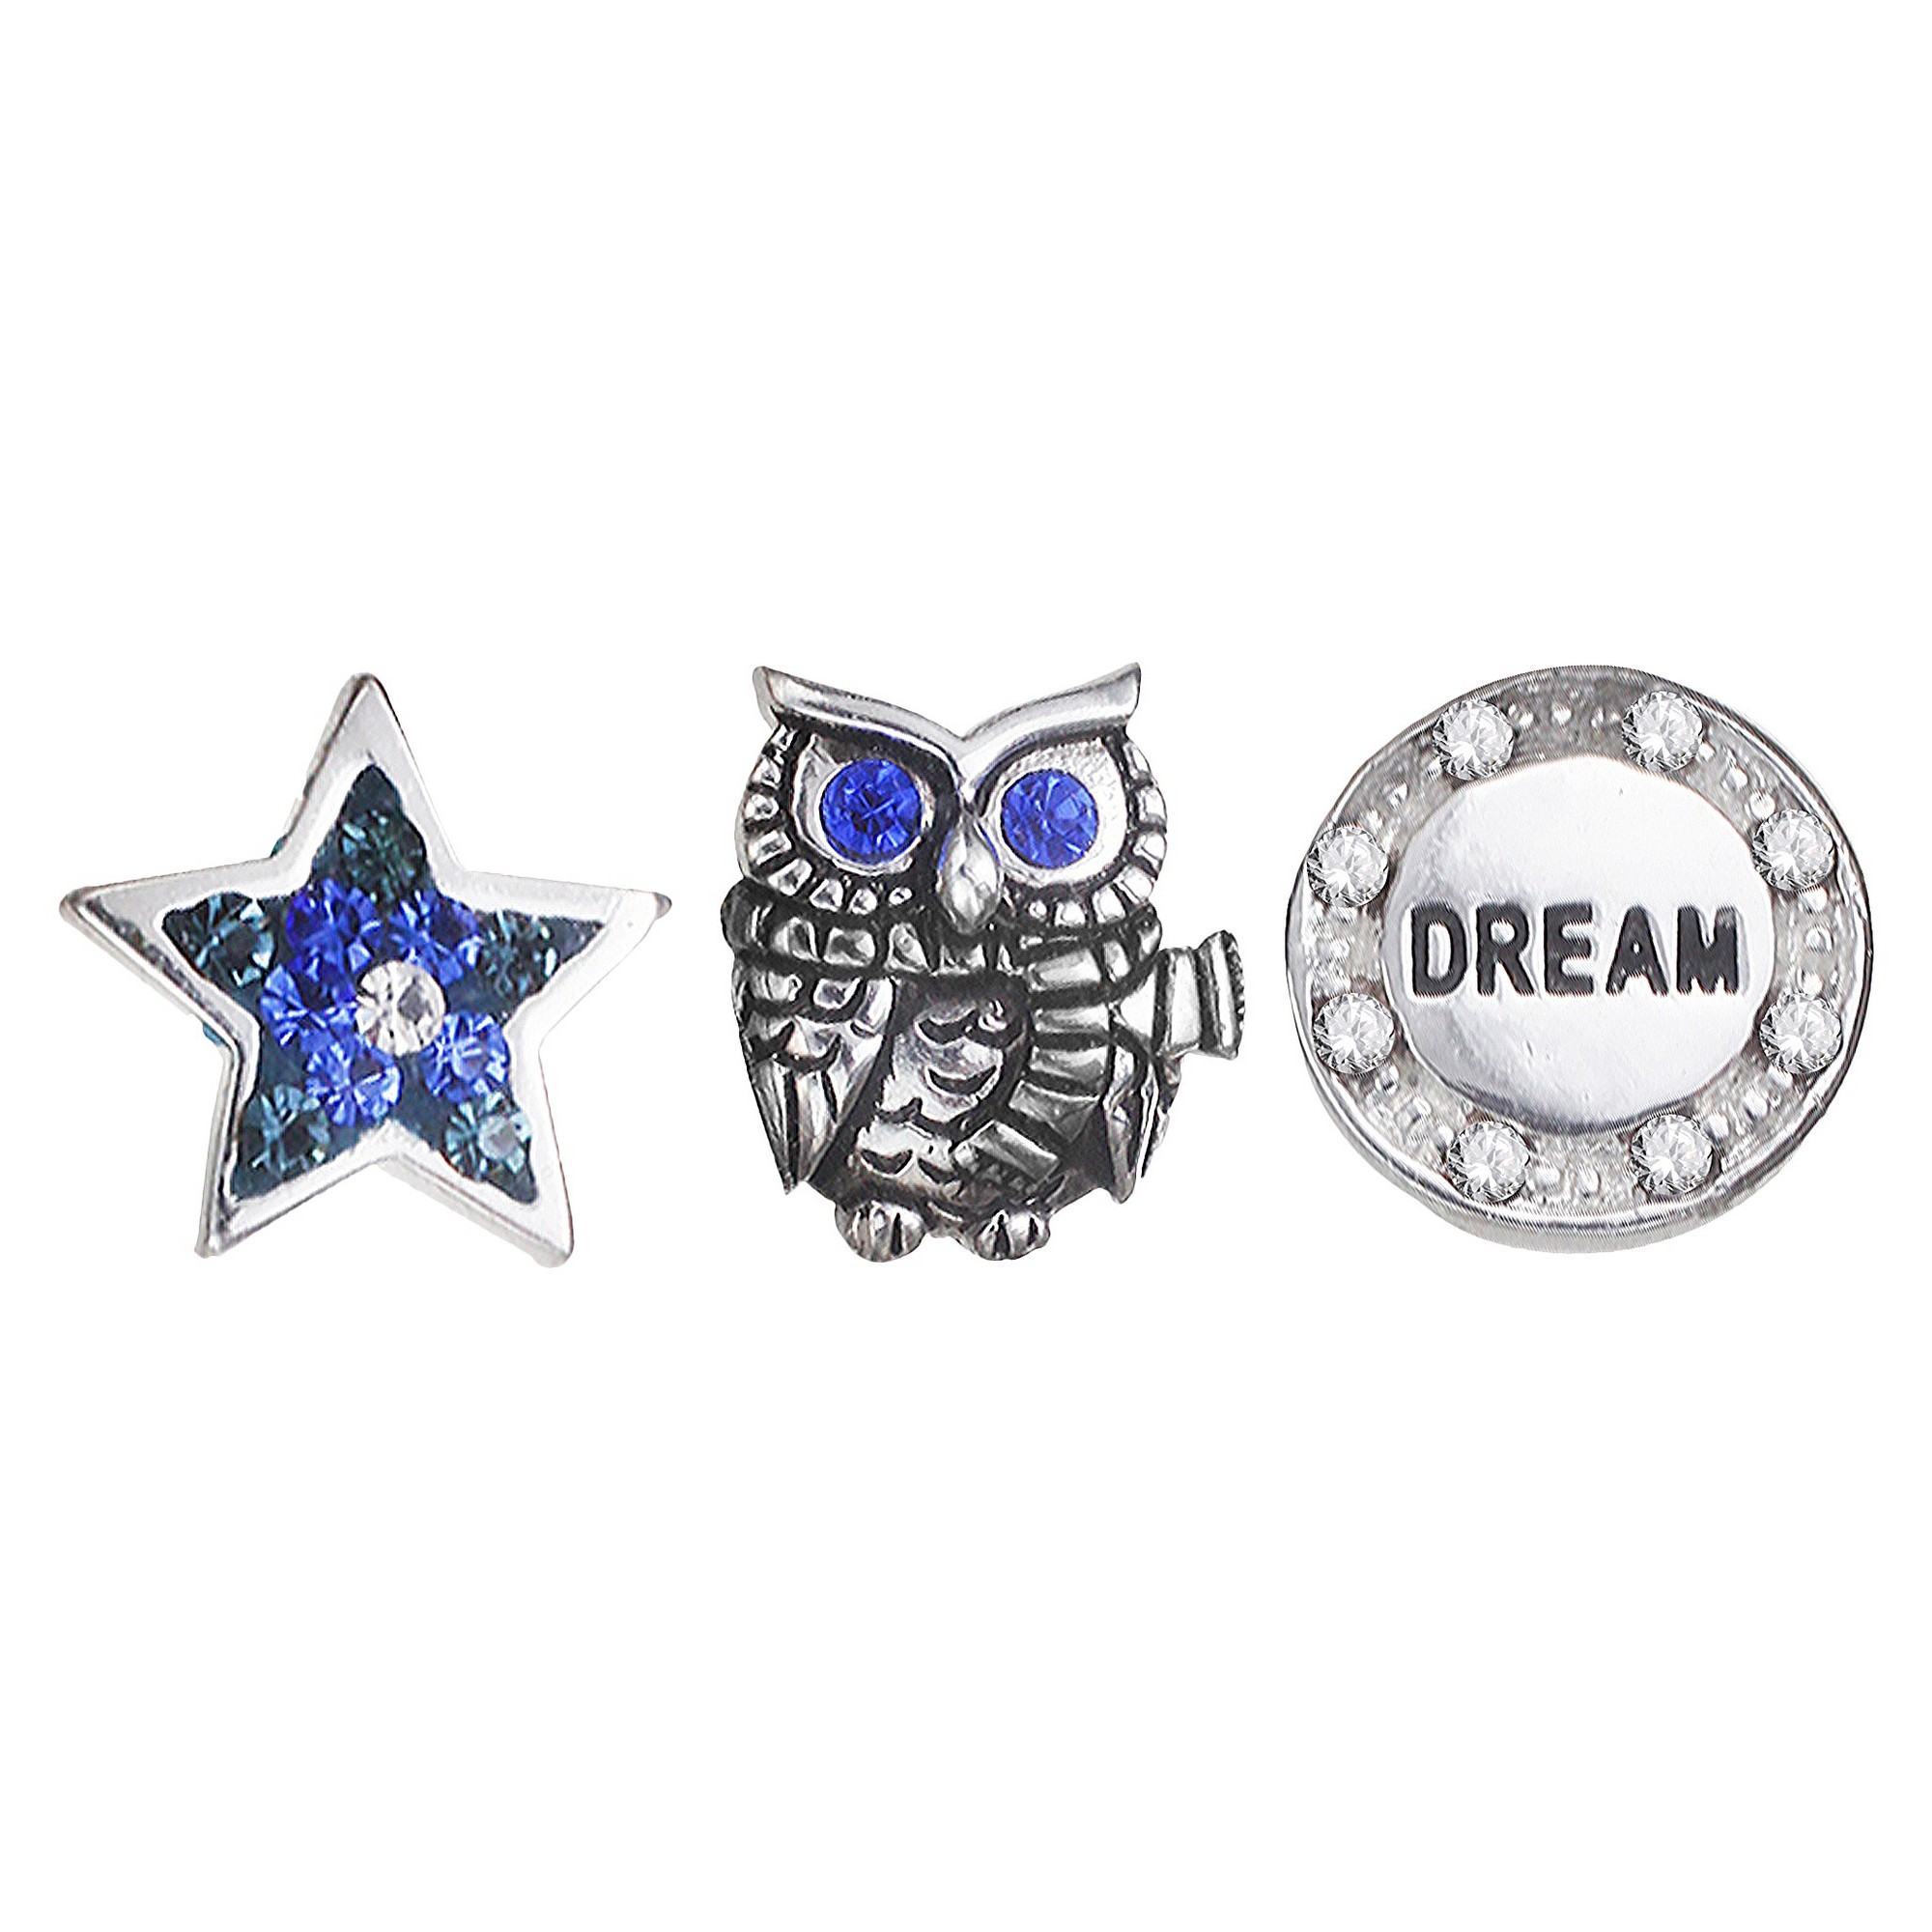 'Treasure Lockets 3 Silver Plated Charm Set with ''A Wise Owl'' Theme - Silver/Blue, Women's, Blue/Silver'